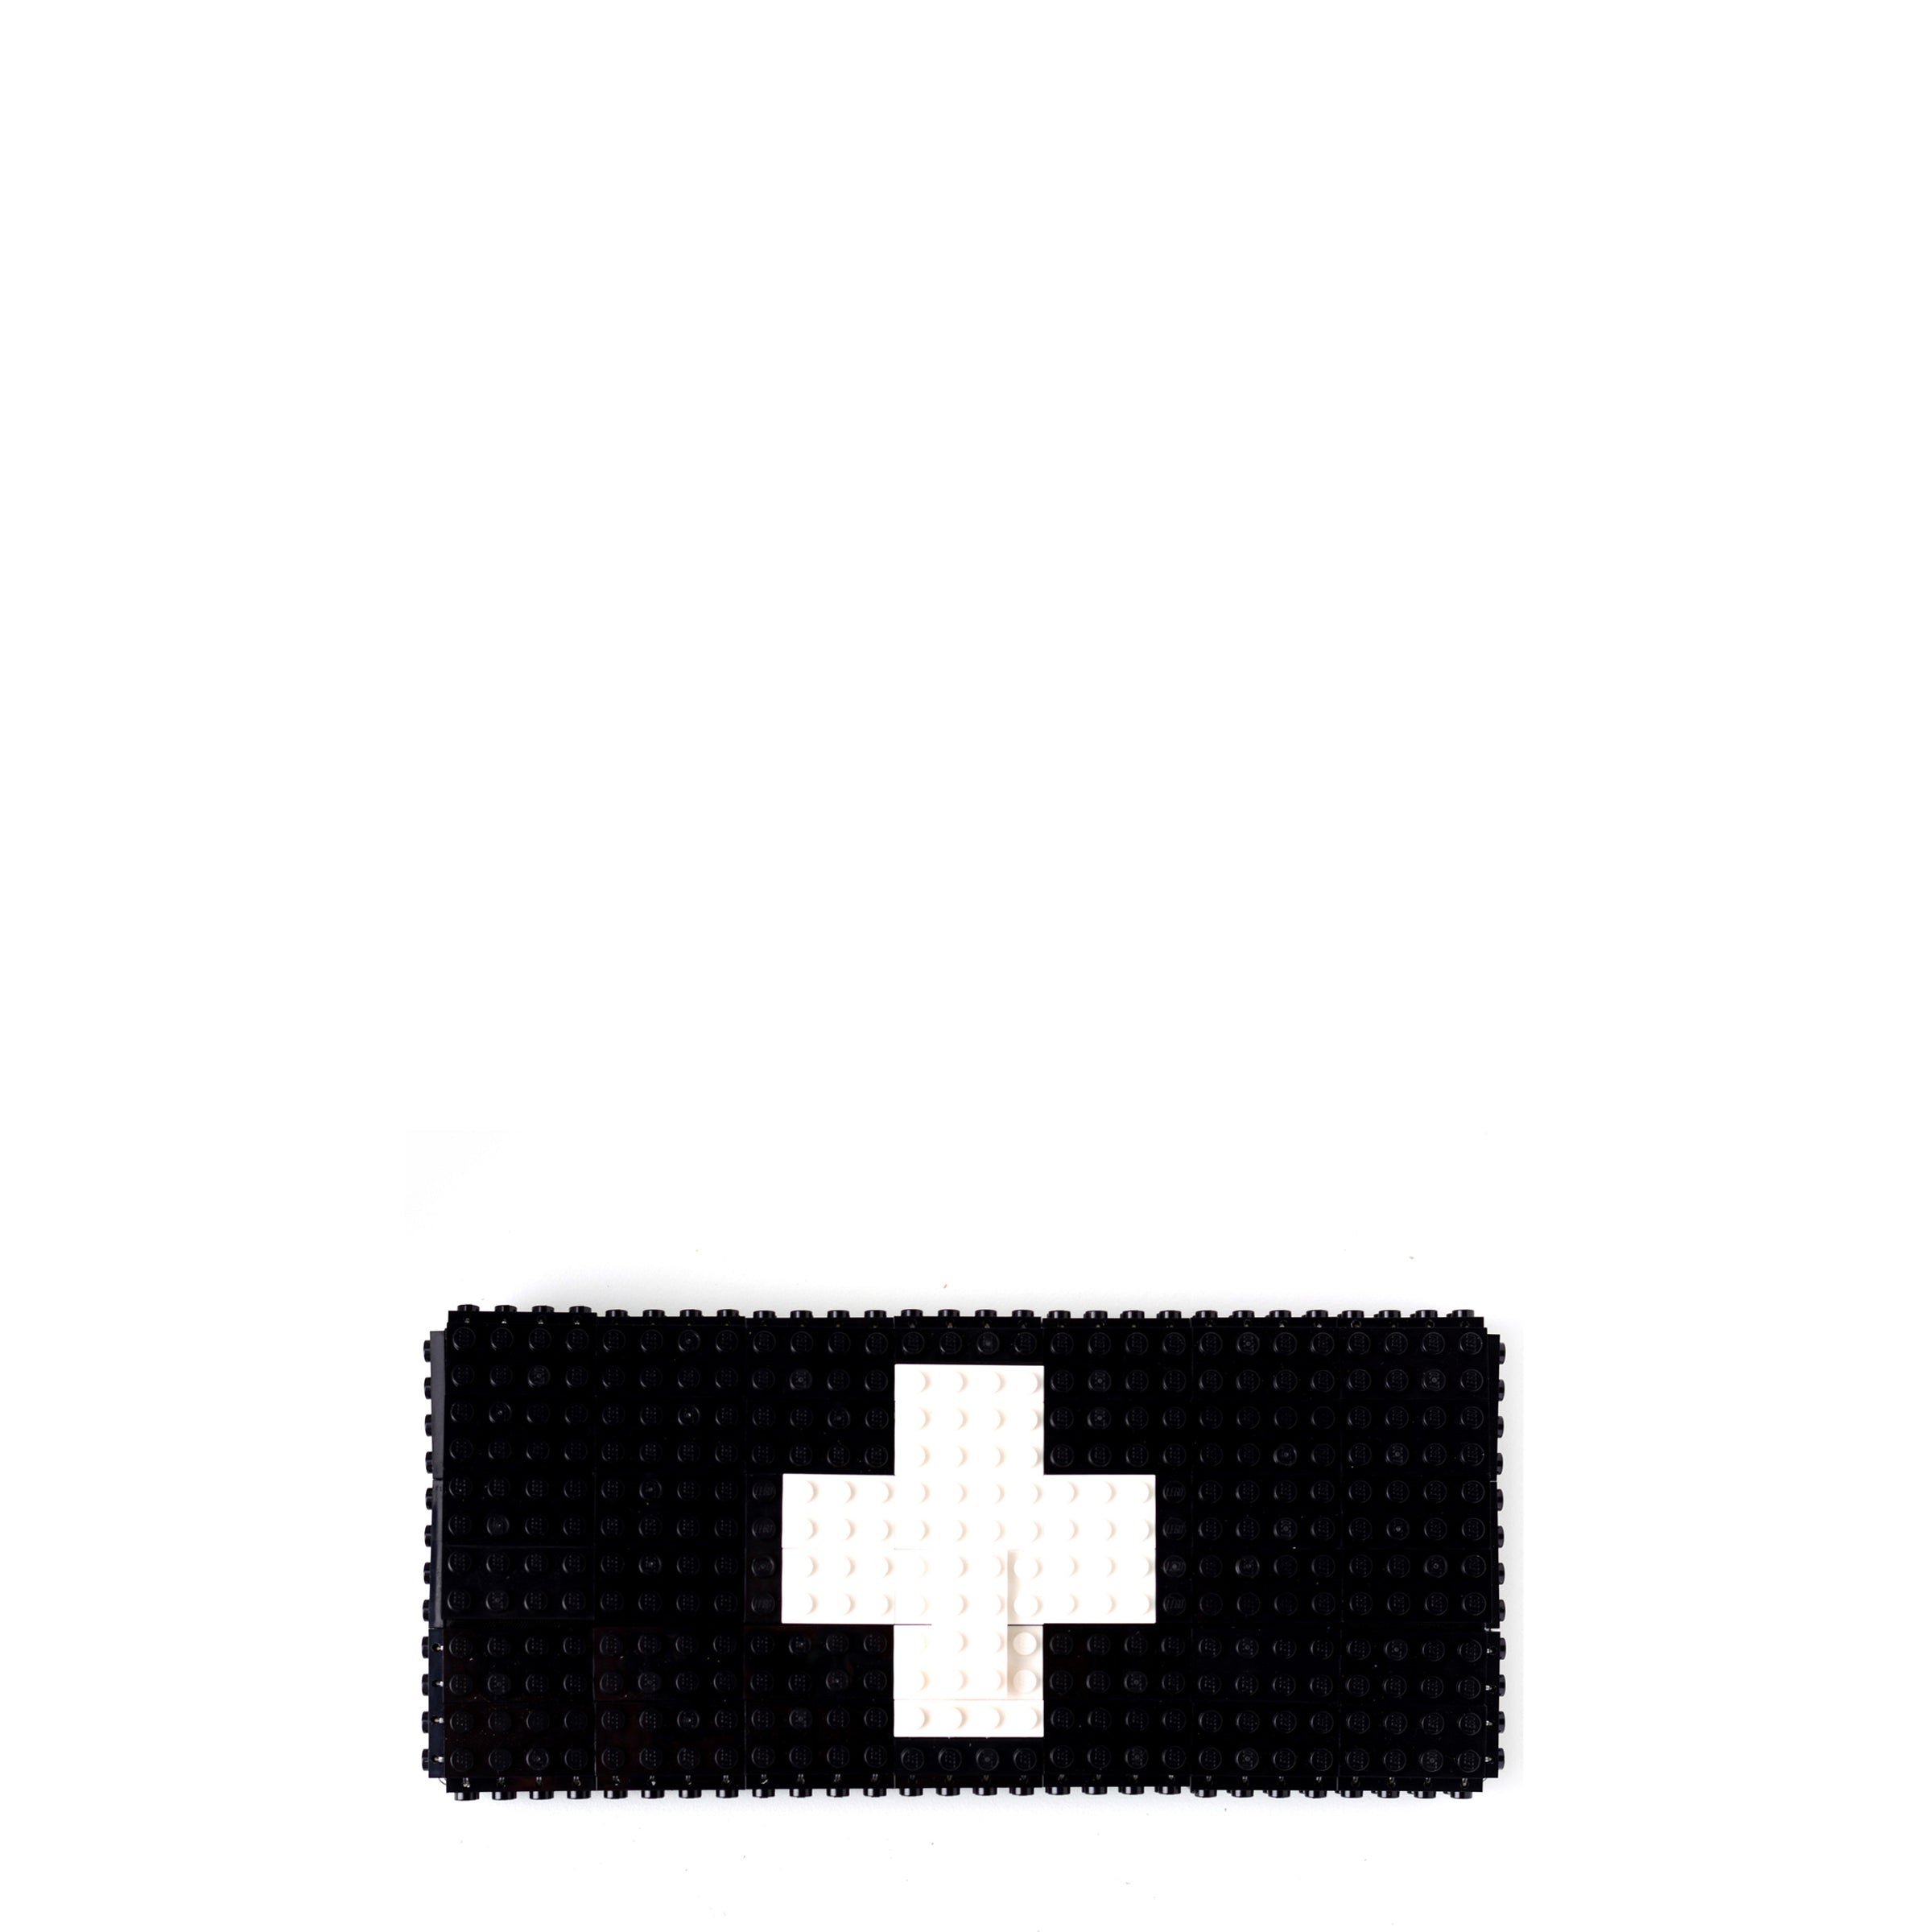 Black clutch with white cross